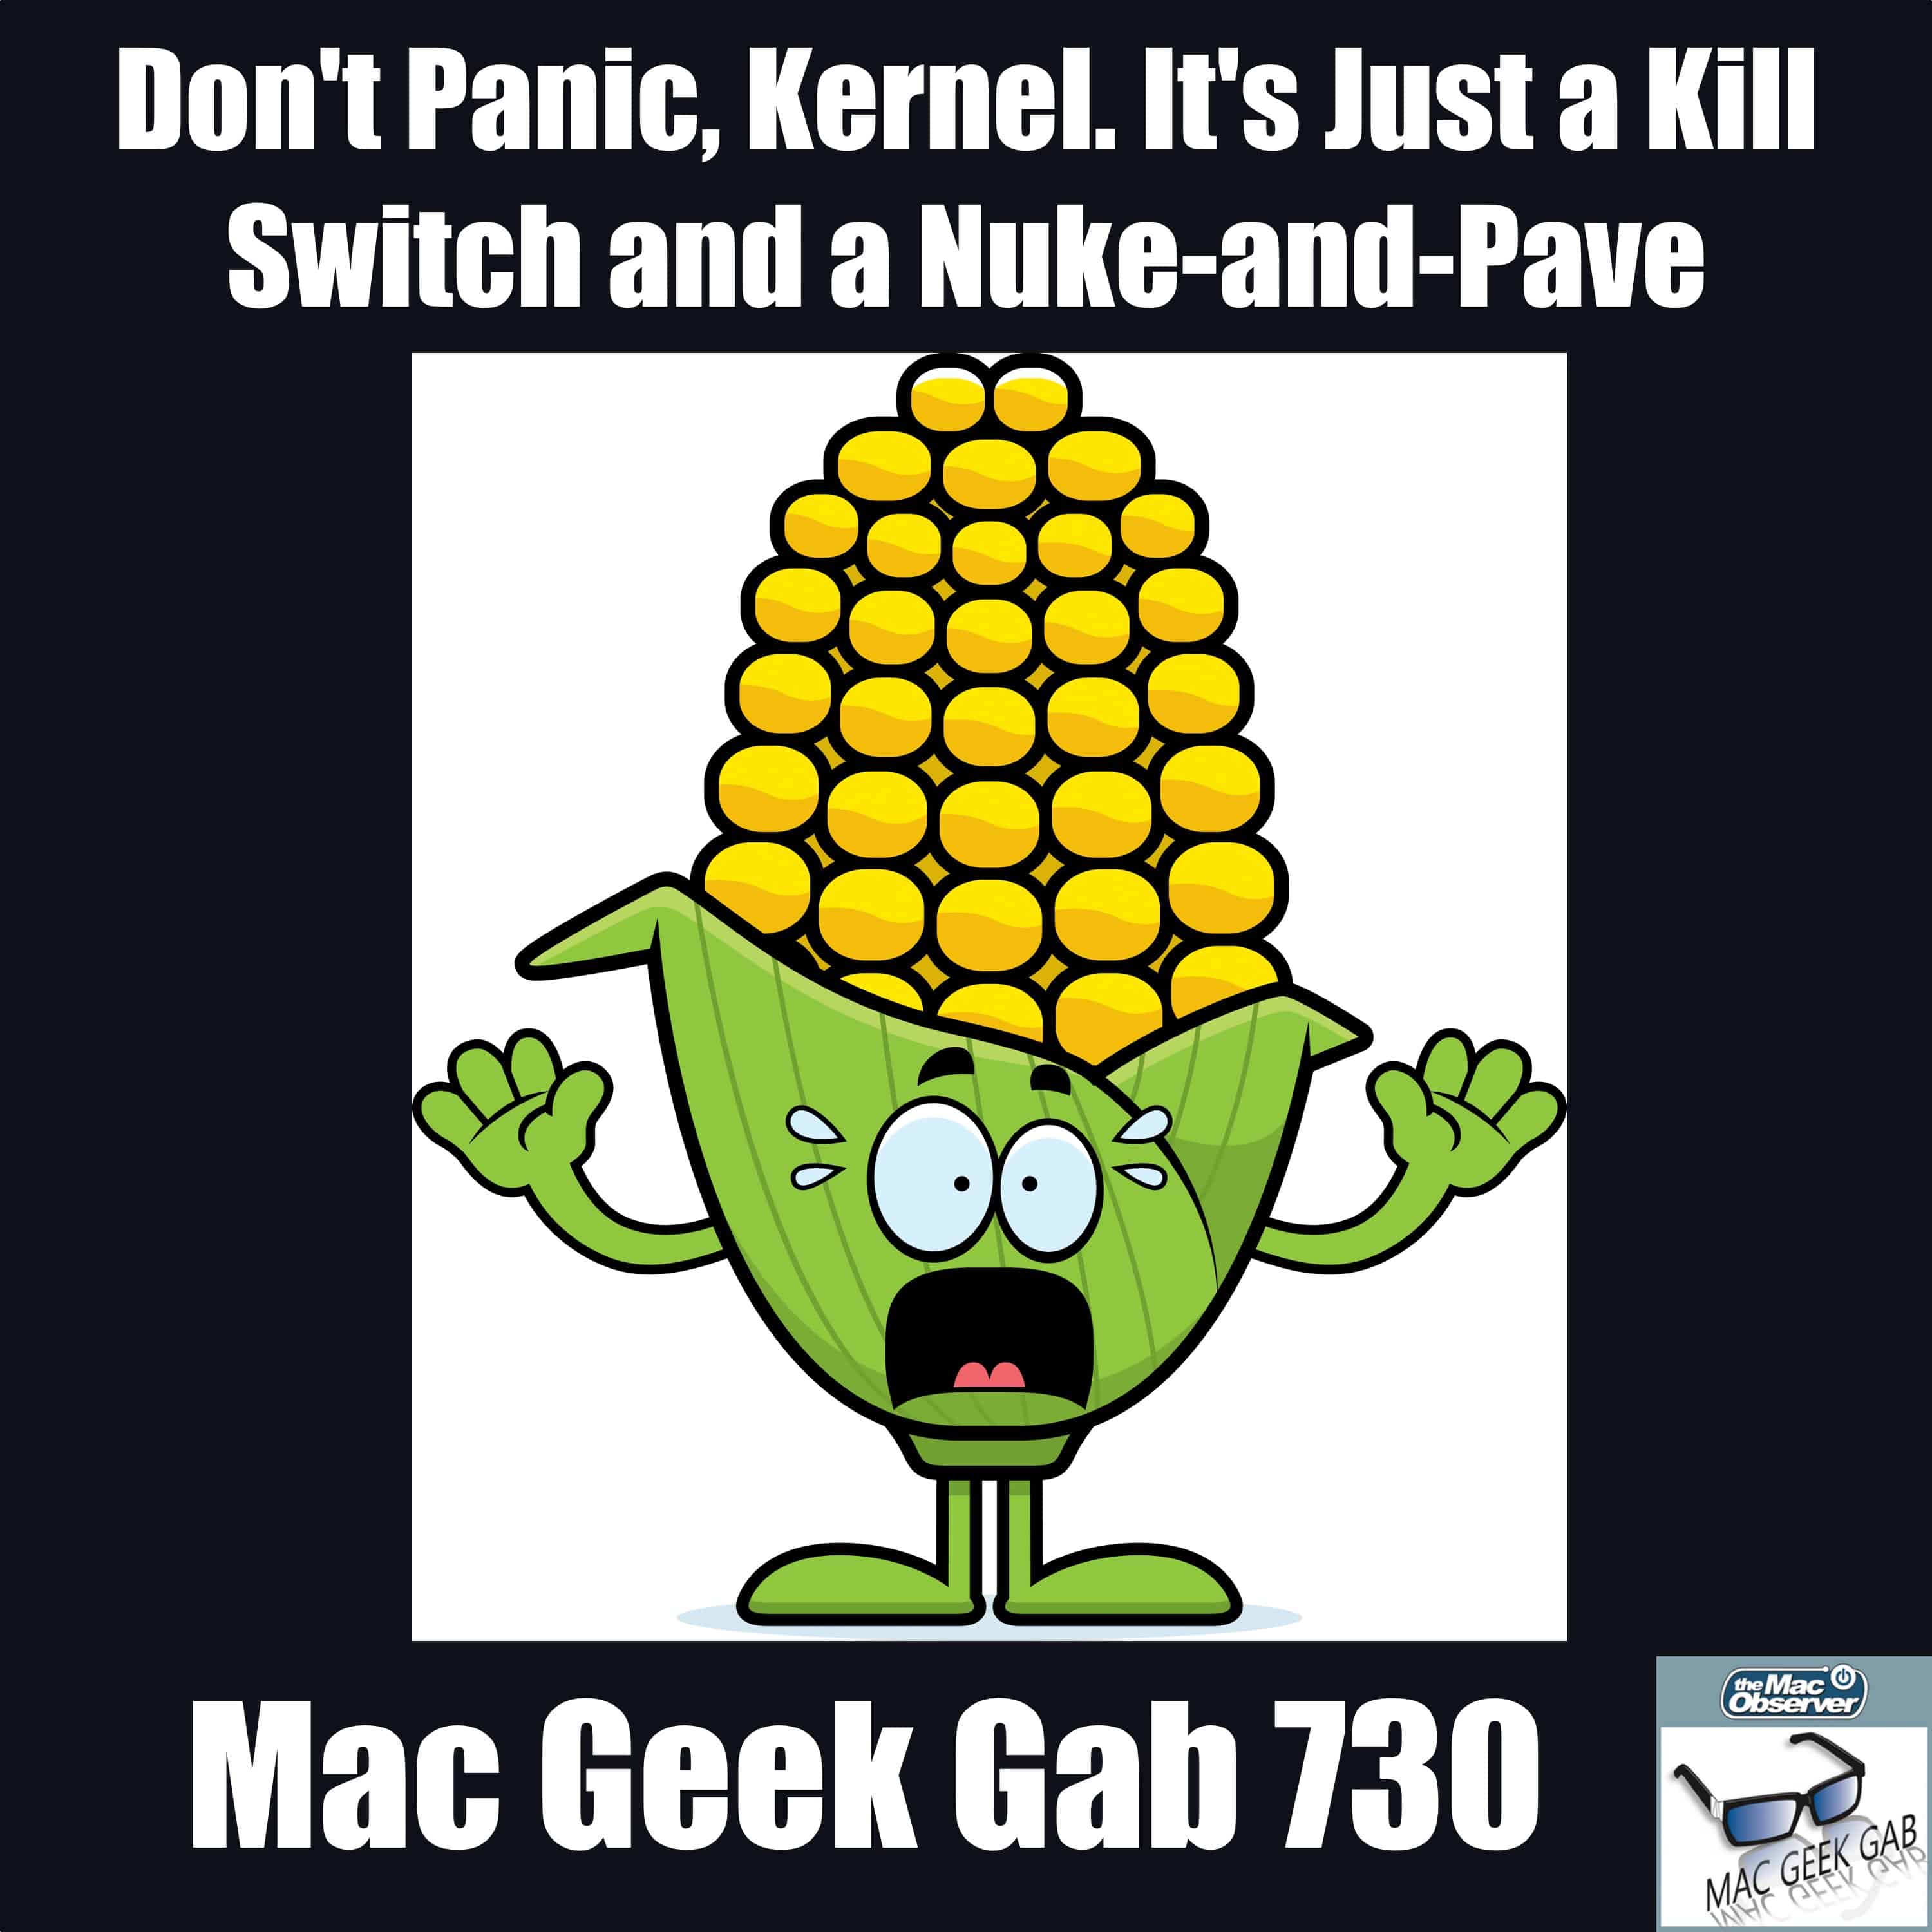 Don’t Panic, Kernel. It’s Just a Kill Switch and a Nuke-and-Pave – Mac Geek Gab Podcast 730